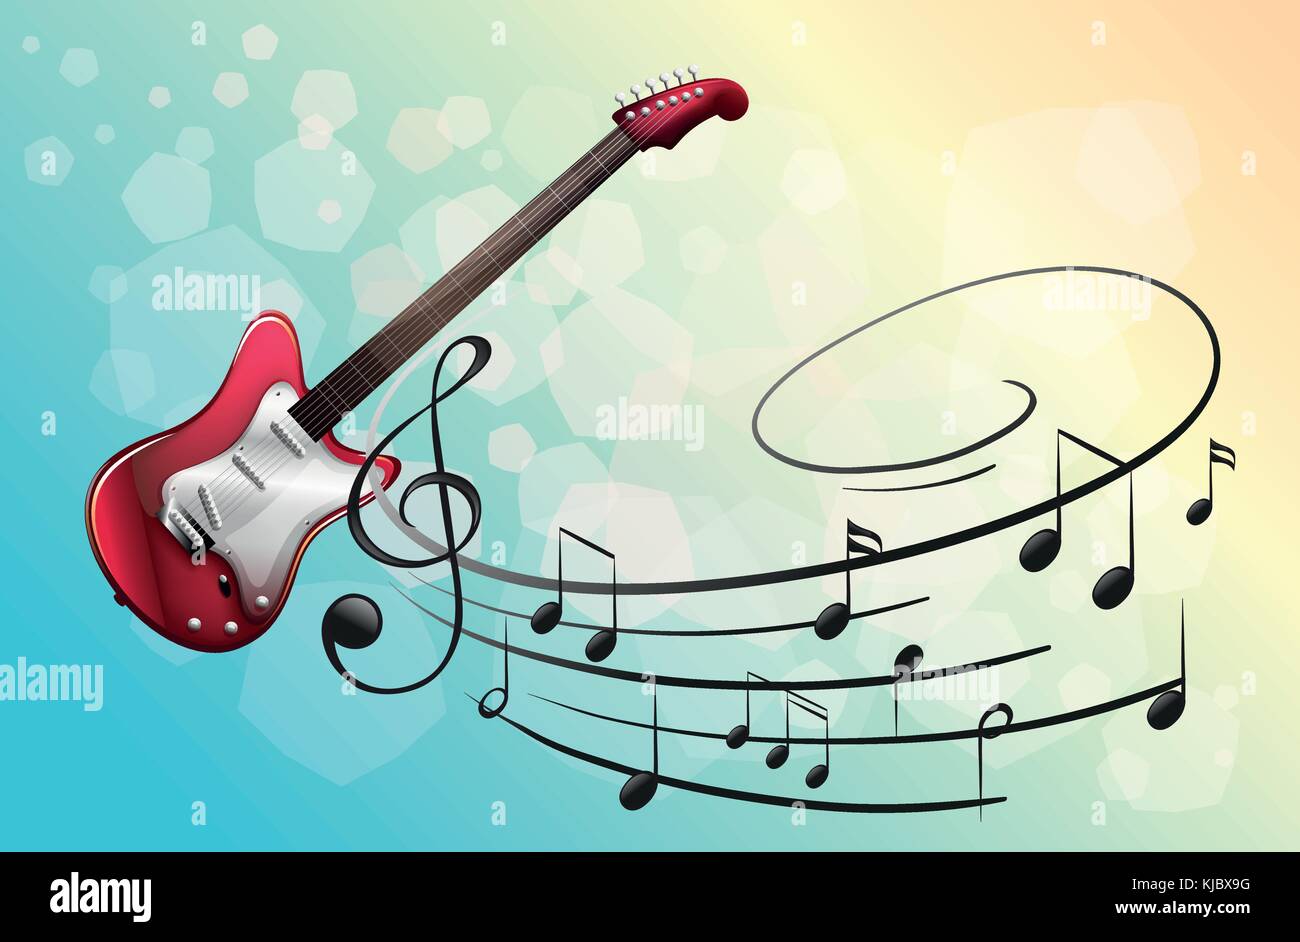 Illustration of a red electric guitar with musical notes Stock Vector